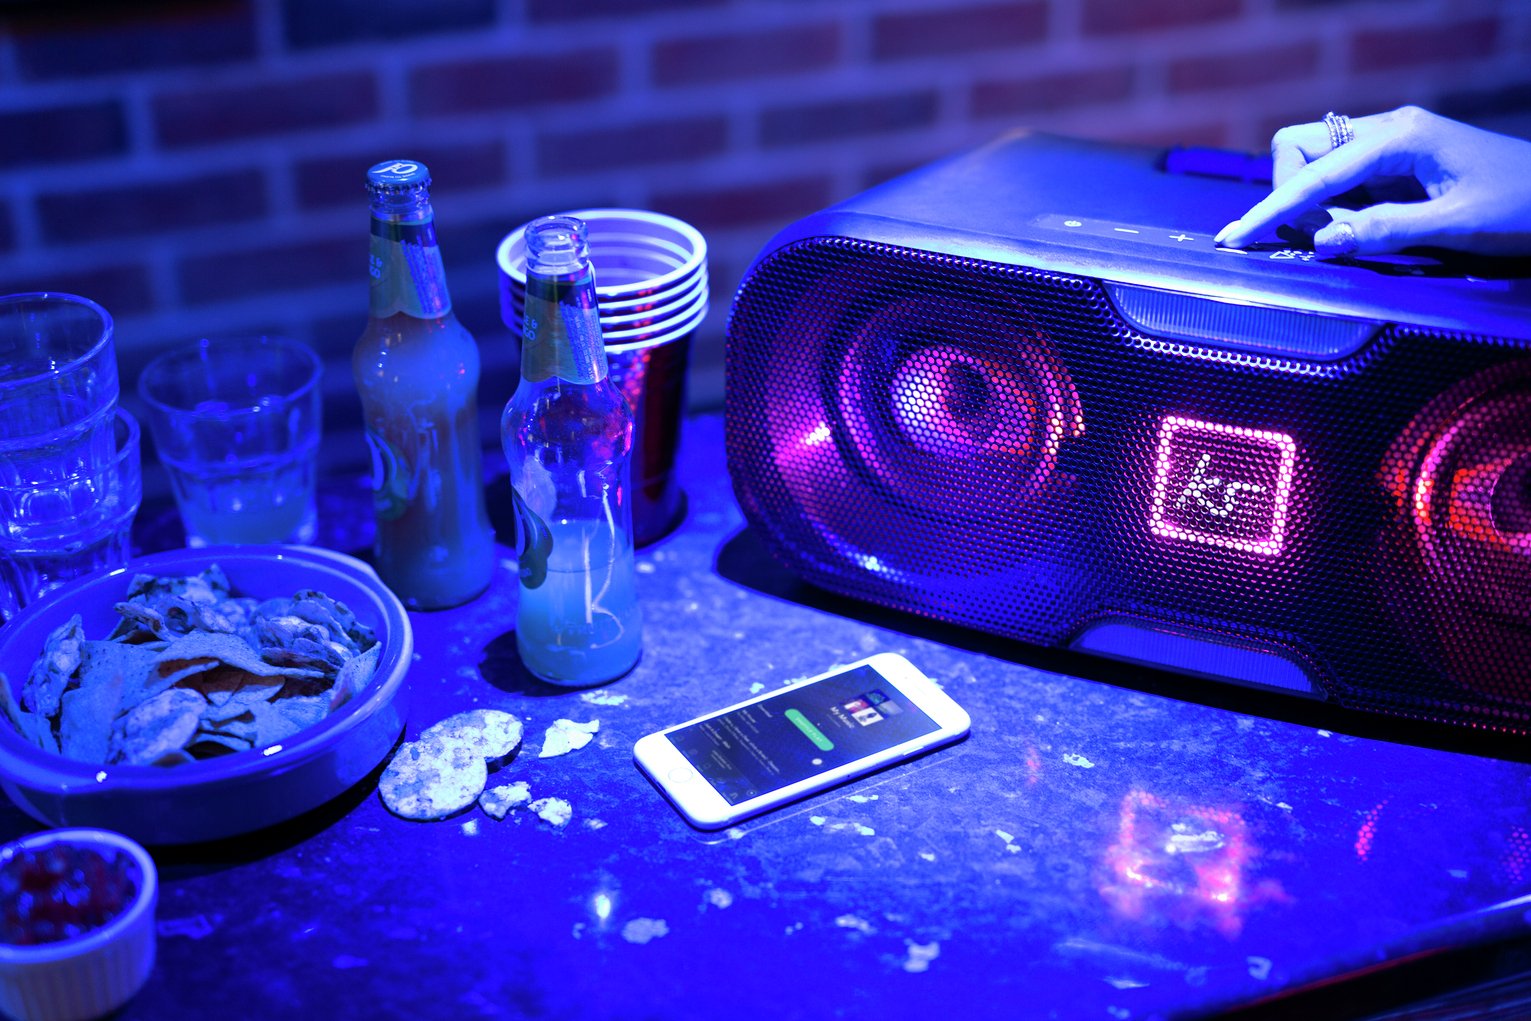 Kitsound Slam XL Bluetooth Party Speaker Review